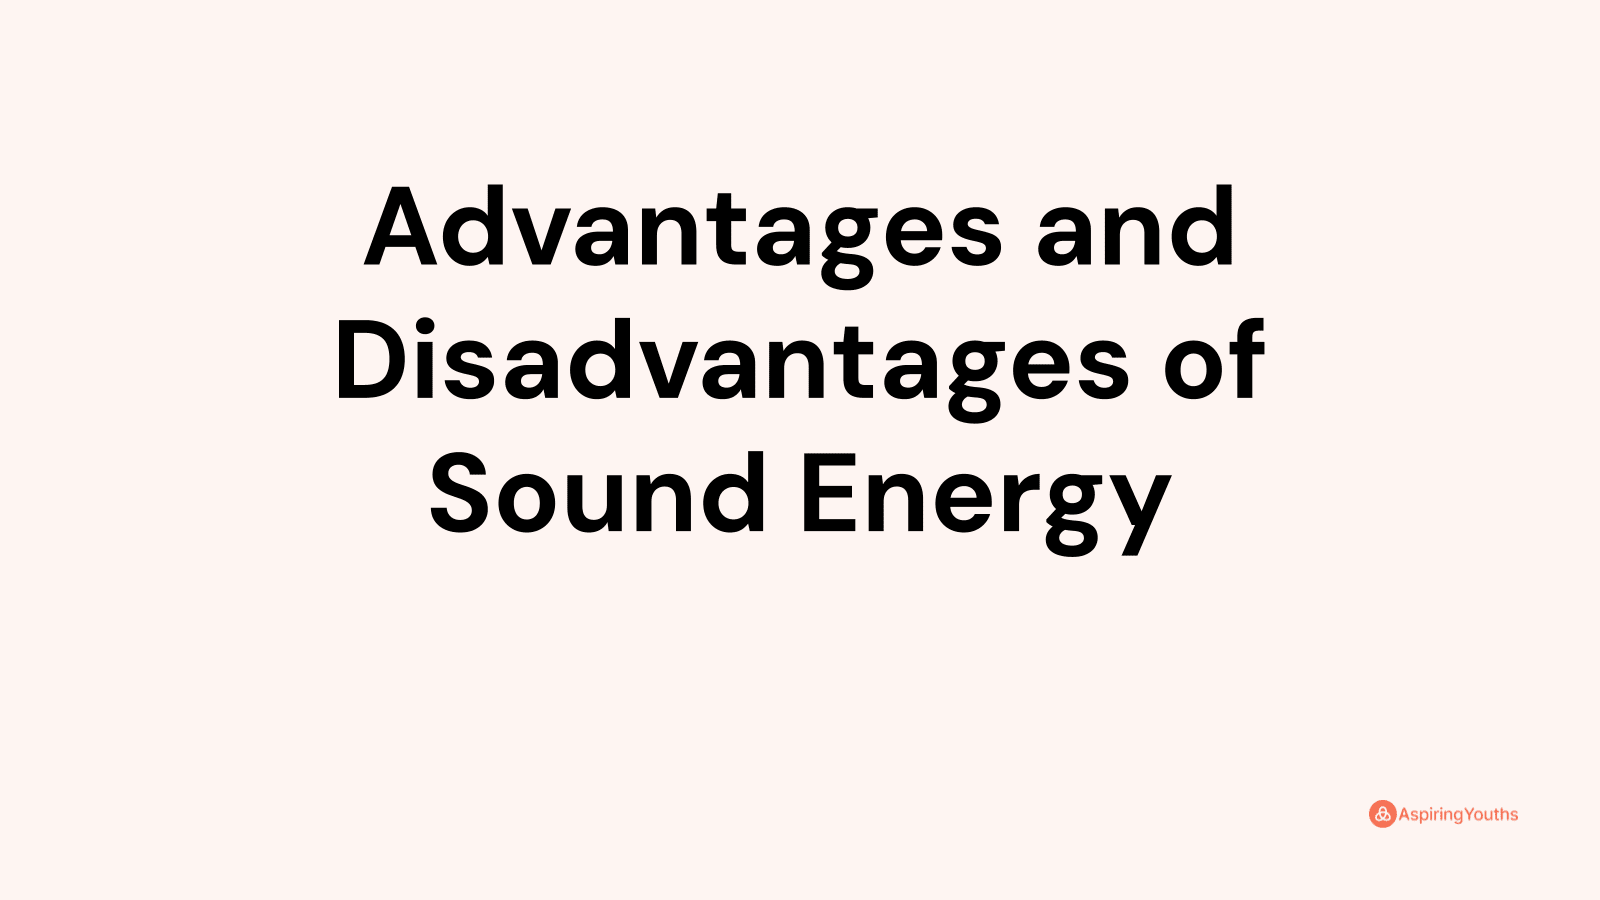 Advantages and disadvantages of Sound Energy